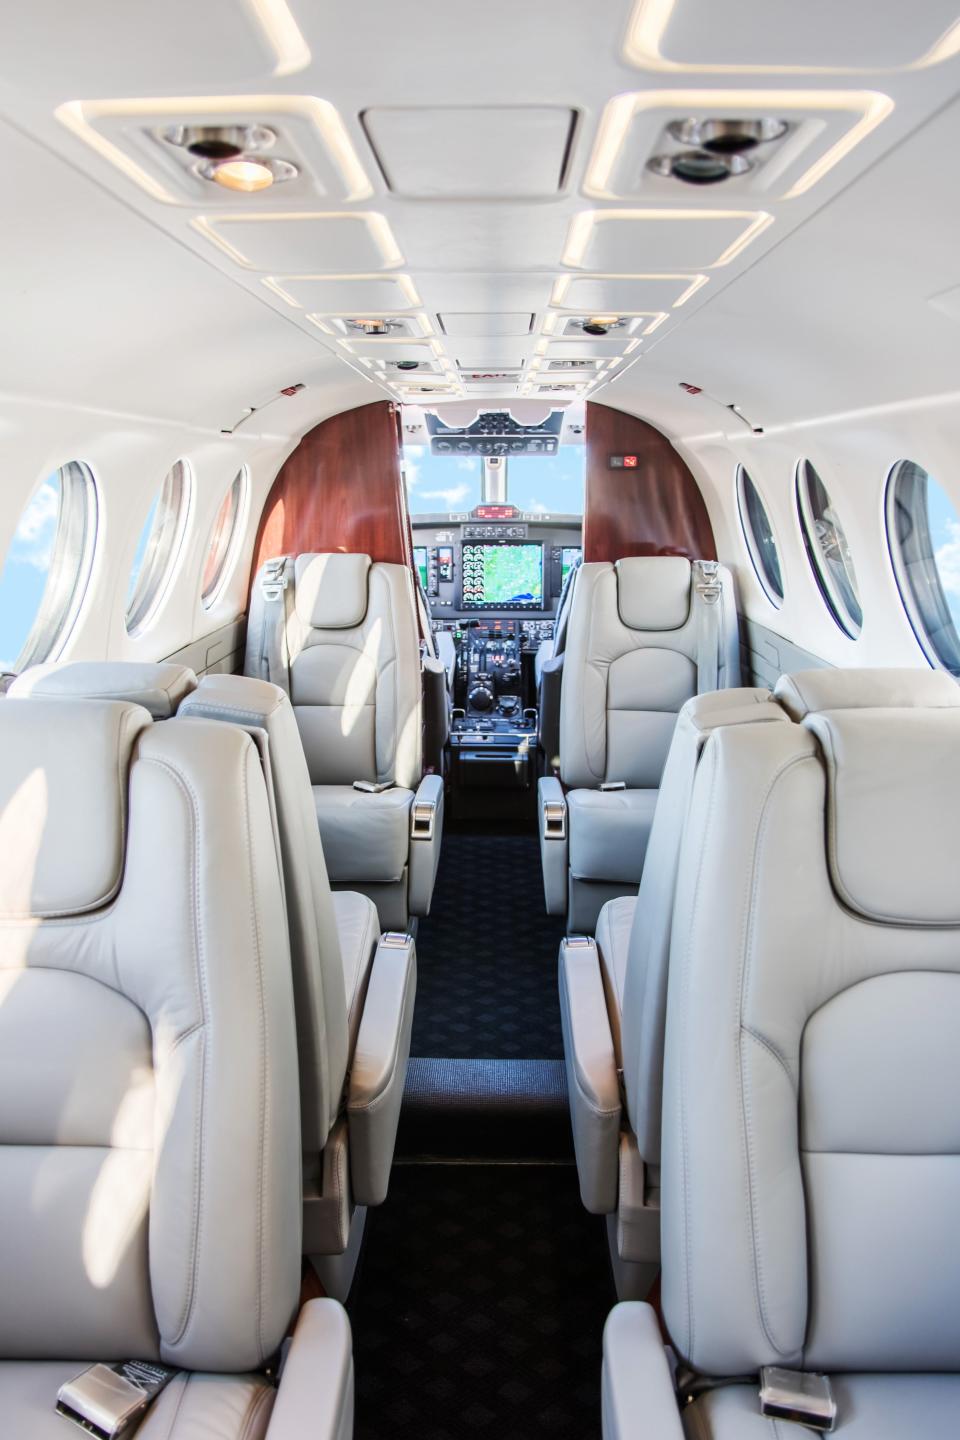 The interior of a King Air 350 plane belonging to Advanced Air. The southern California based airline is scheduled to provide flight service out of Carlsbad in November 2023